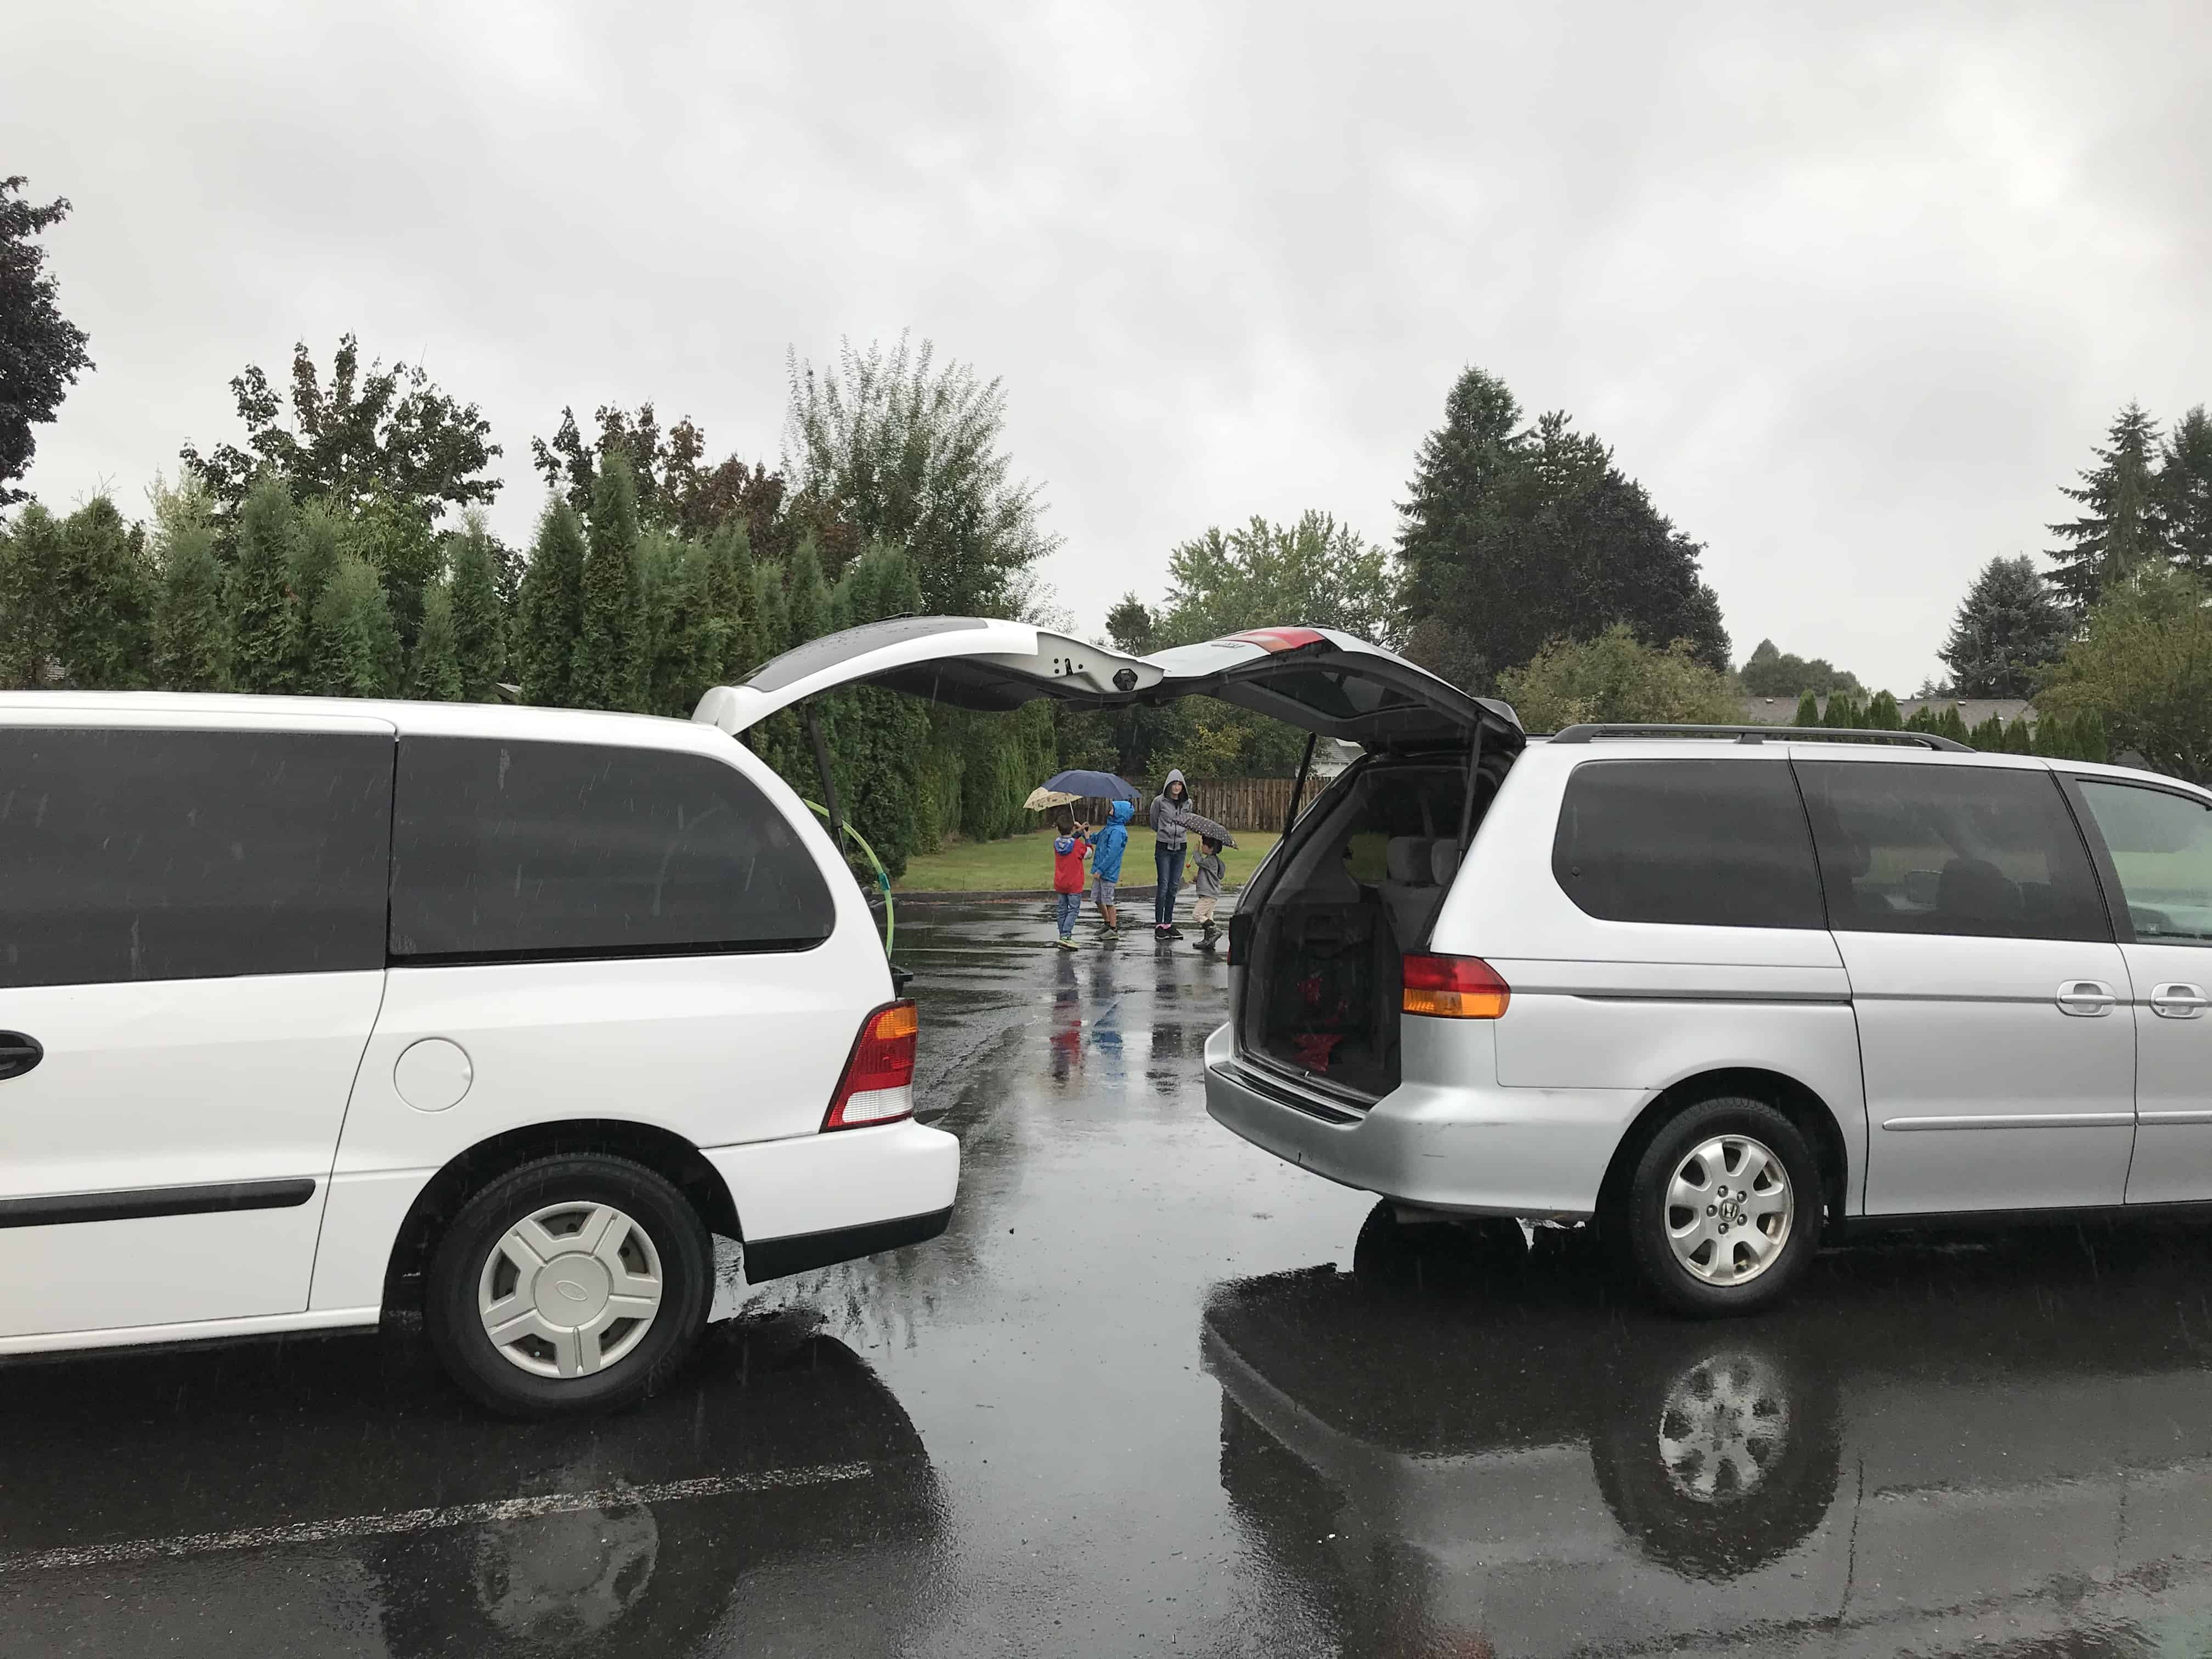 white minivan with rear door open facing away from gray minivan with rear door open. Our Nissan NV 3500 is much better than both!